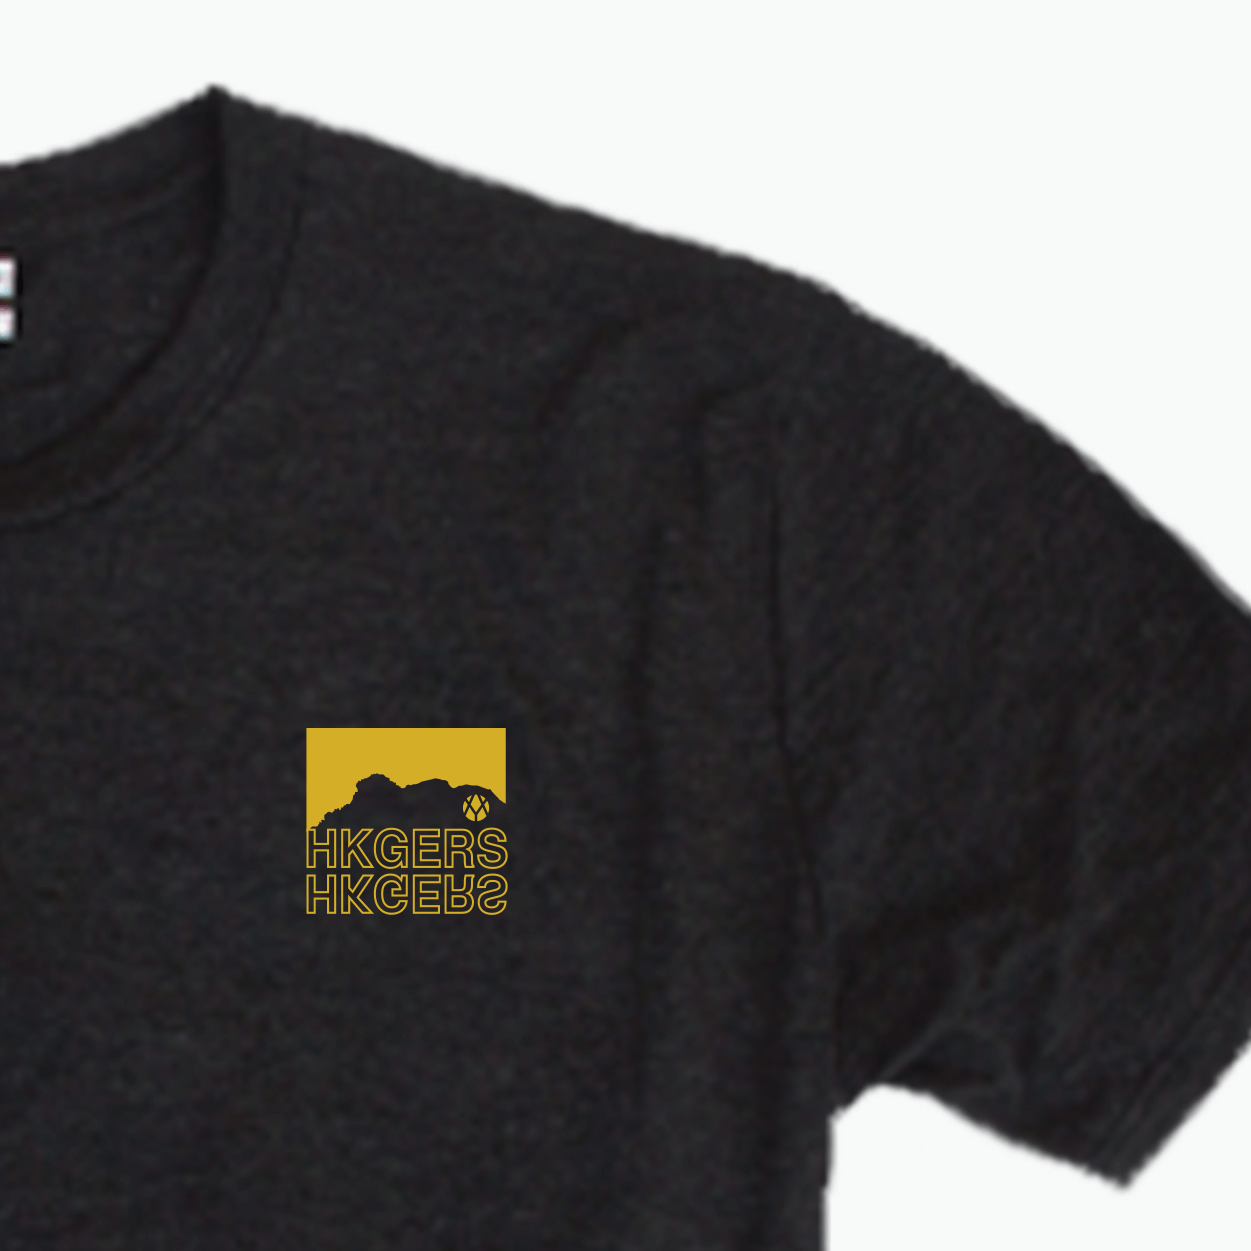 HKGERS T-Shirt (Black) - A Yellow Object